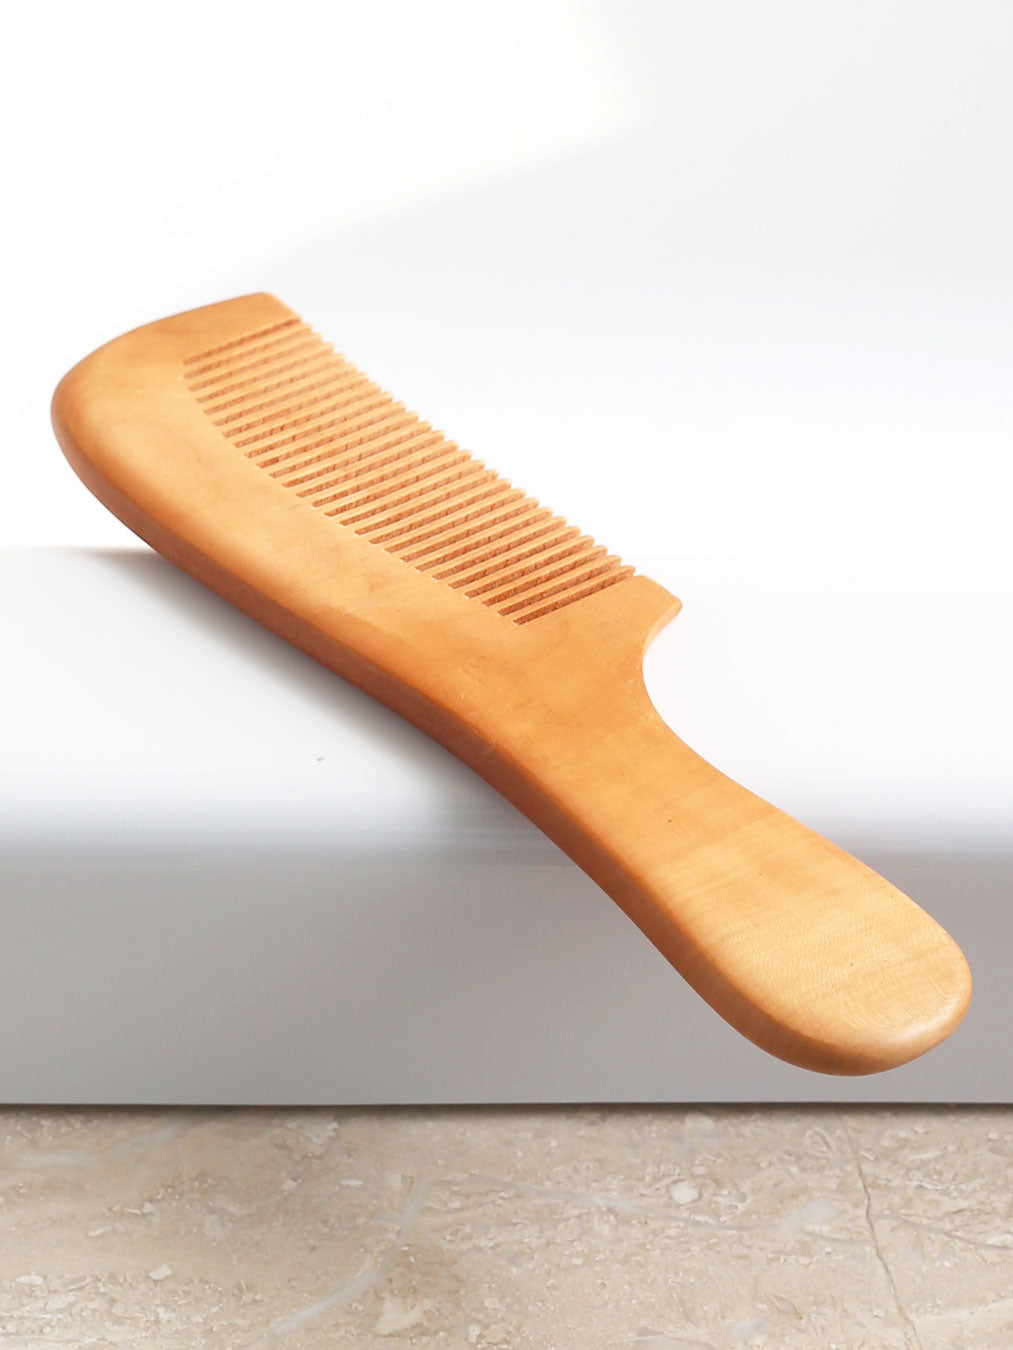 Natural light wood combs with handle for medium and thin healthy hair